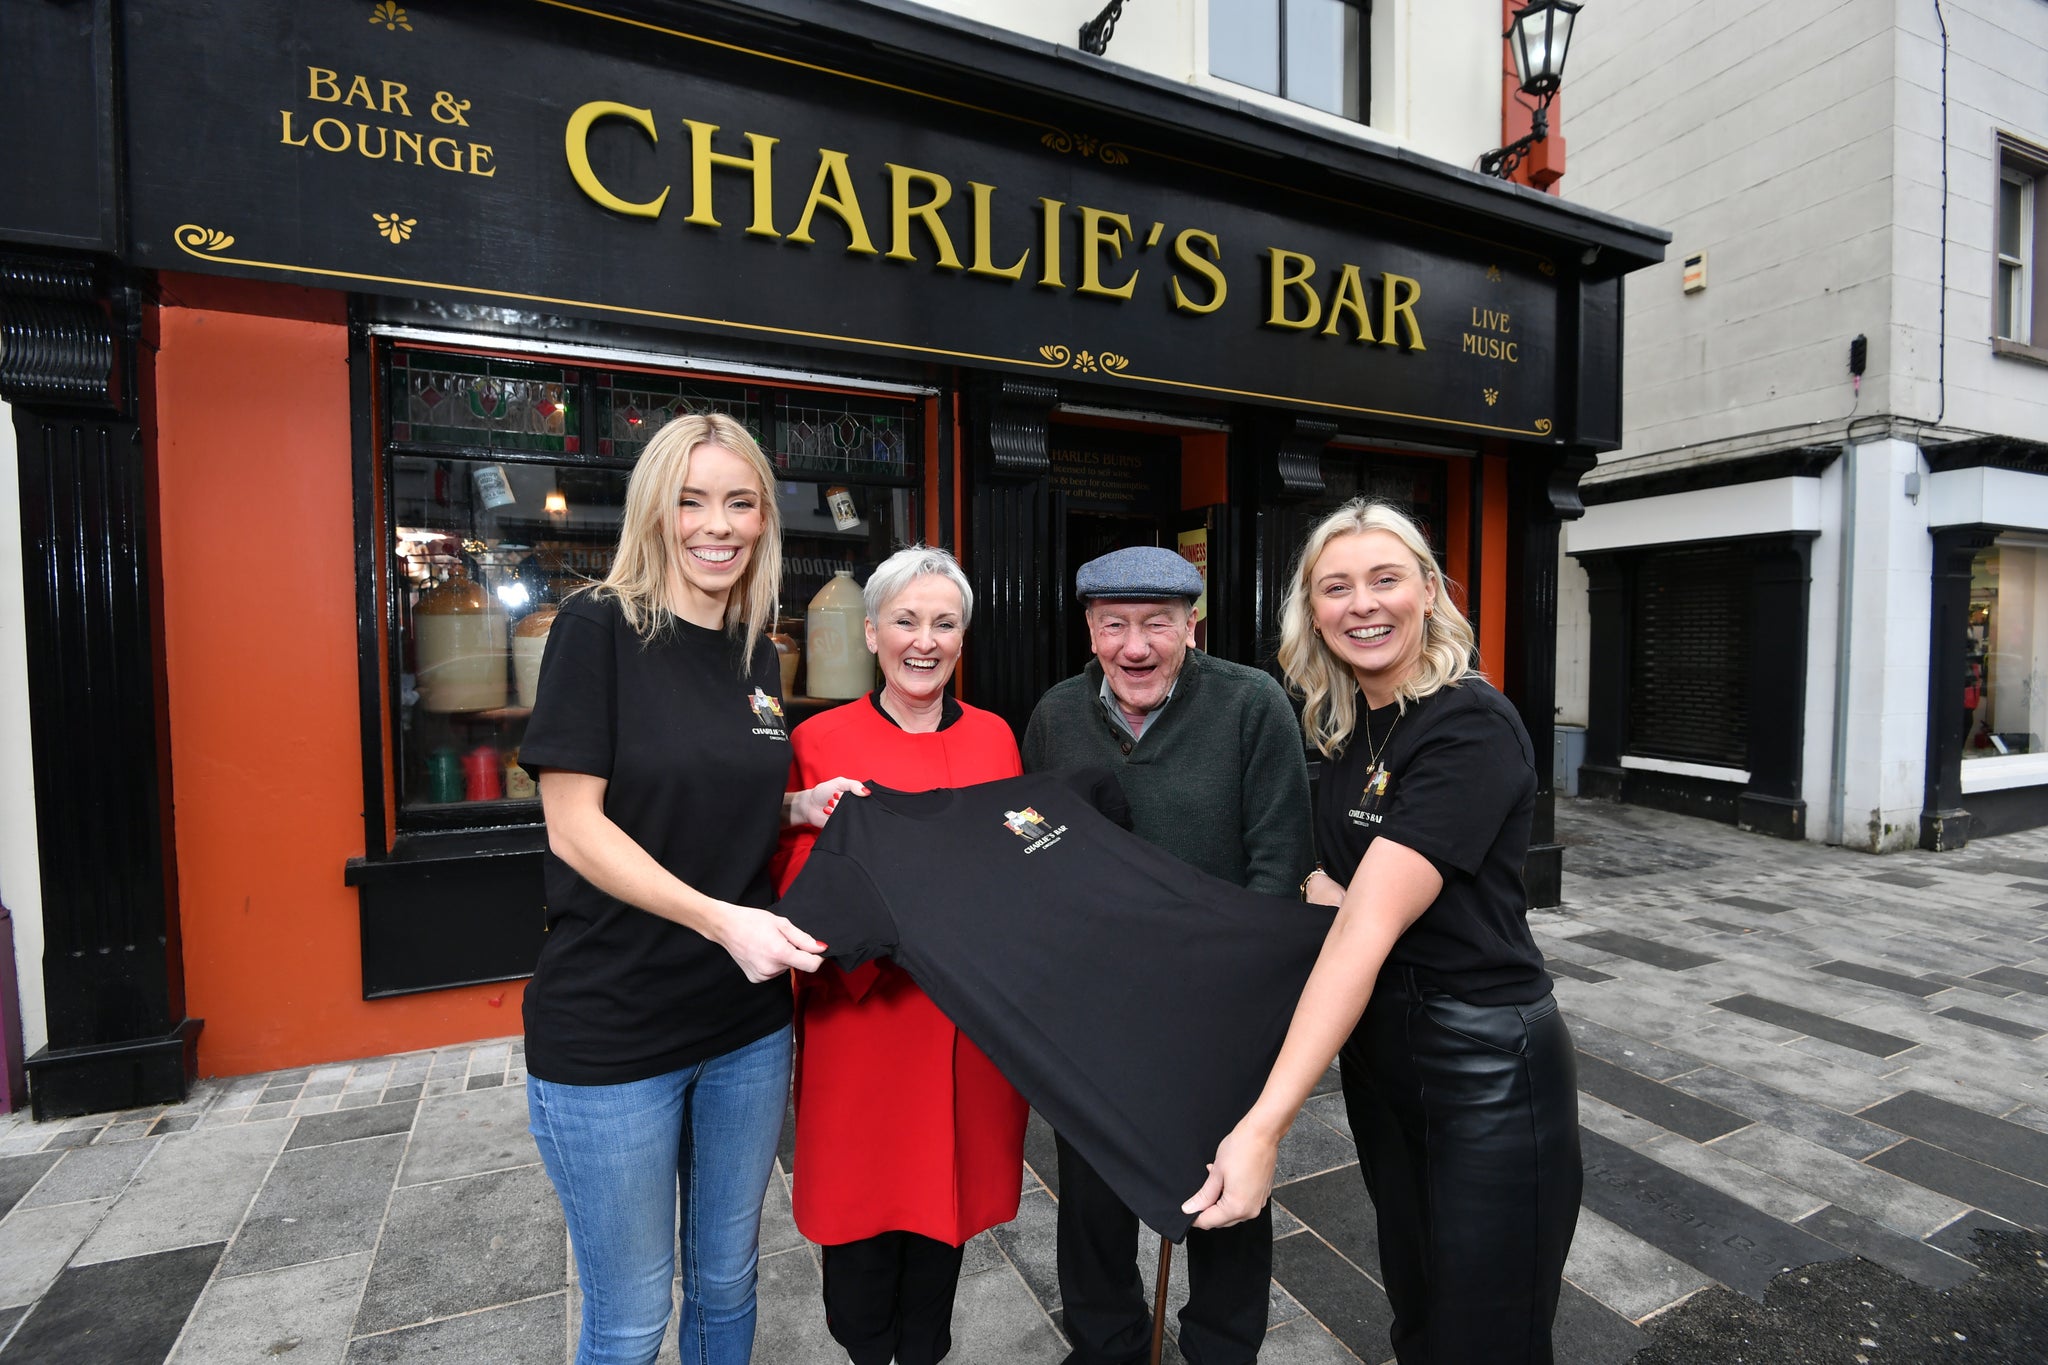 Charlies Bar x Ted & Stitch Charity Jumper (Limited Edition)